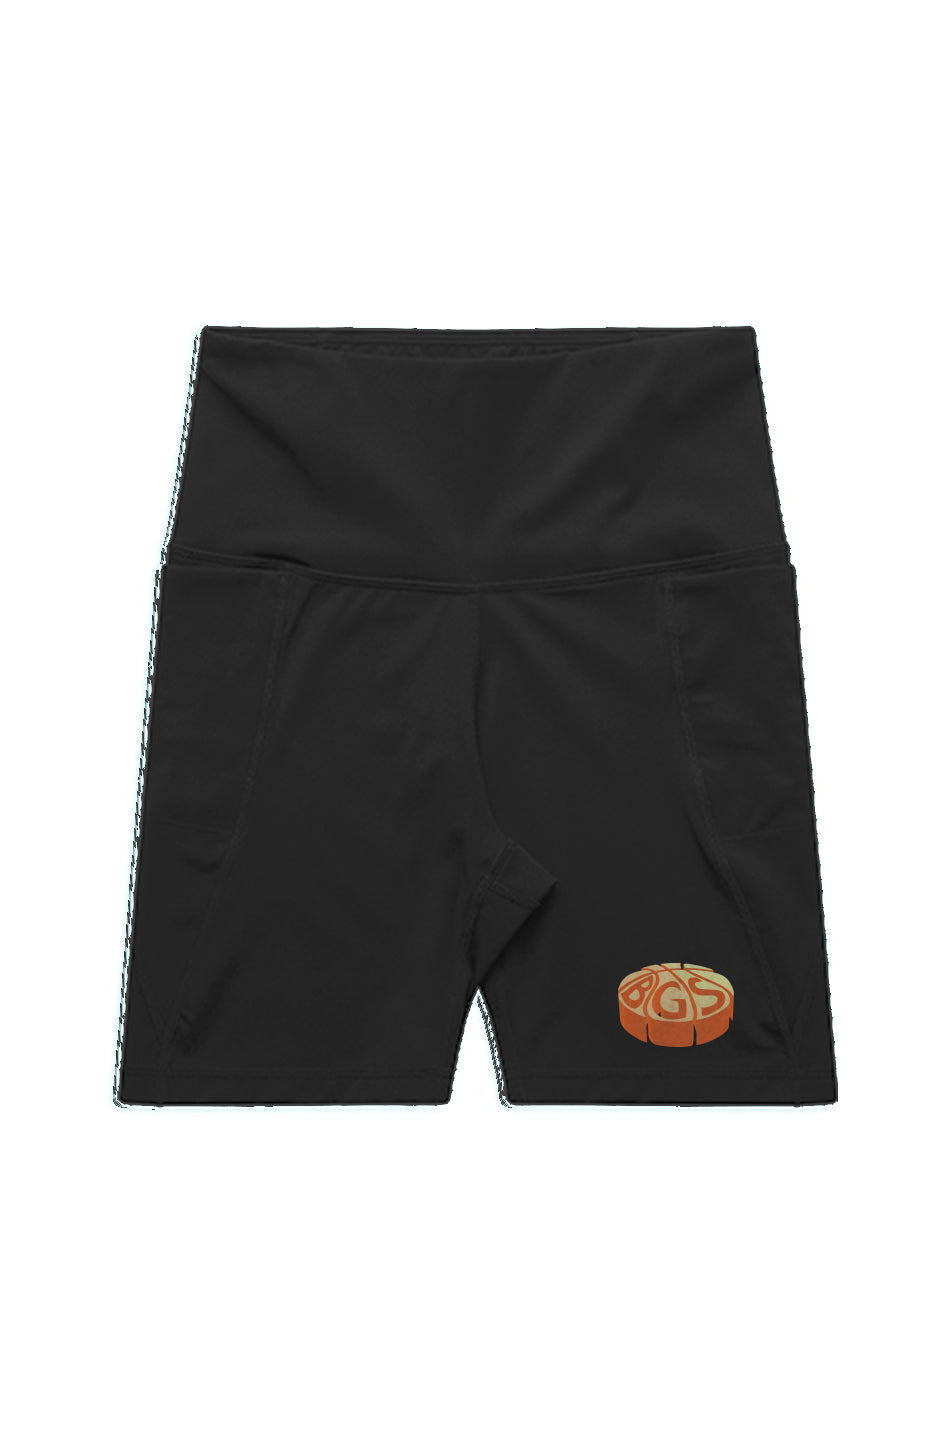 OBS WO'S ACTIVE BIKE SHORTS